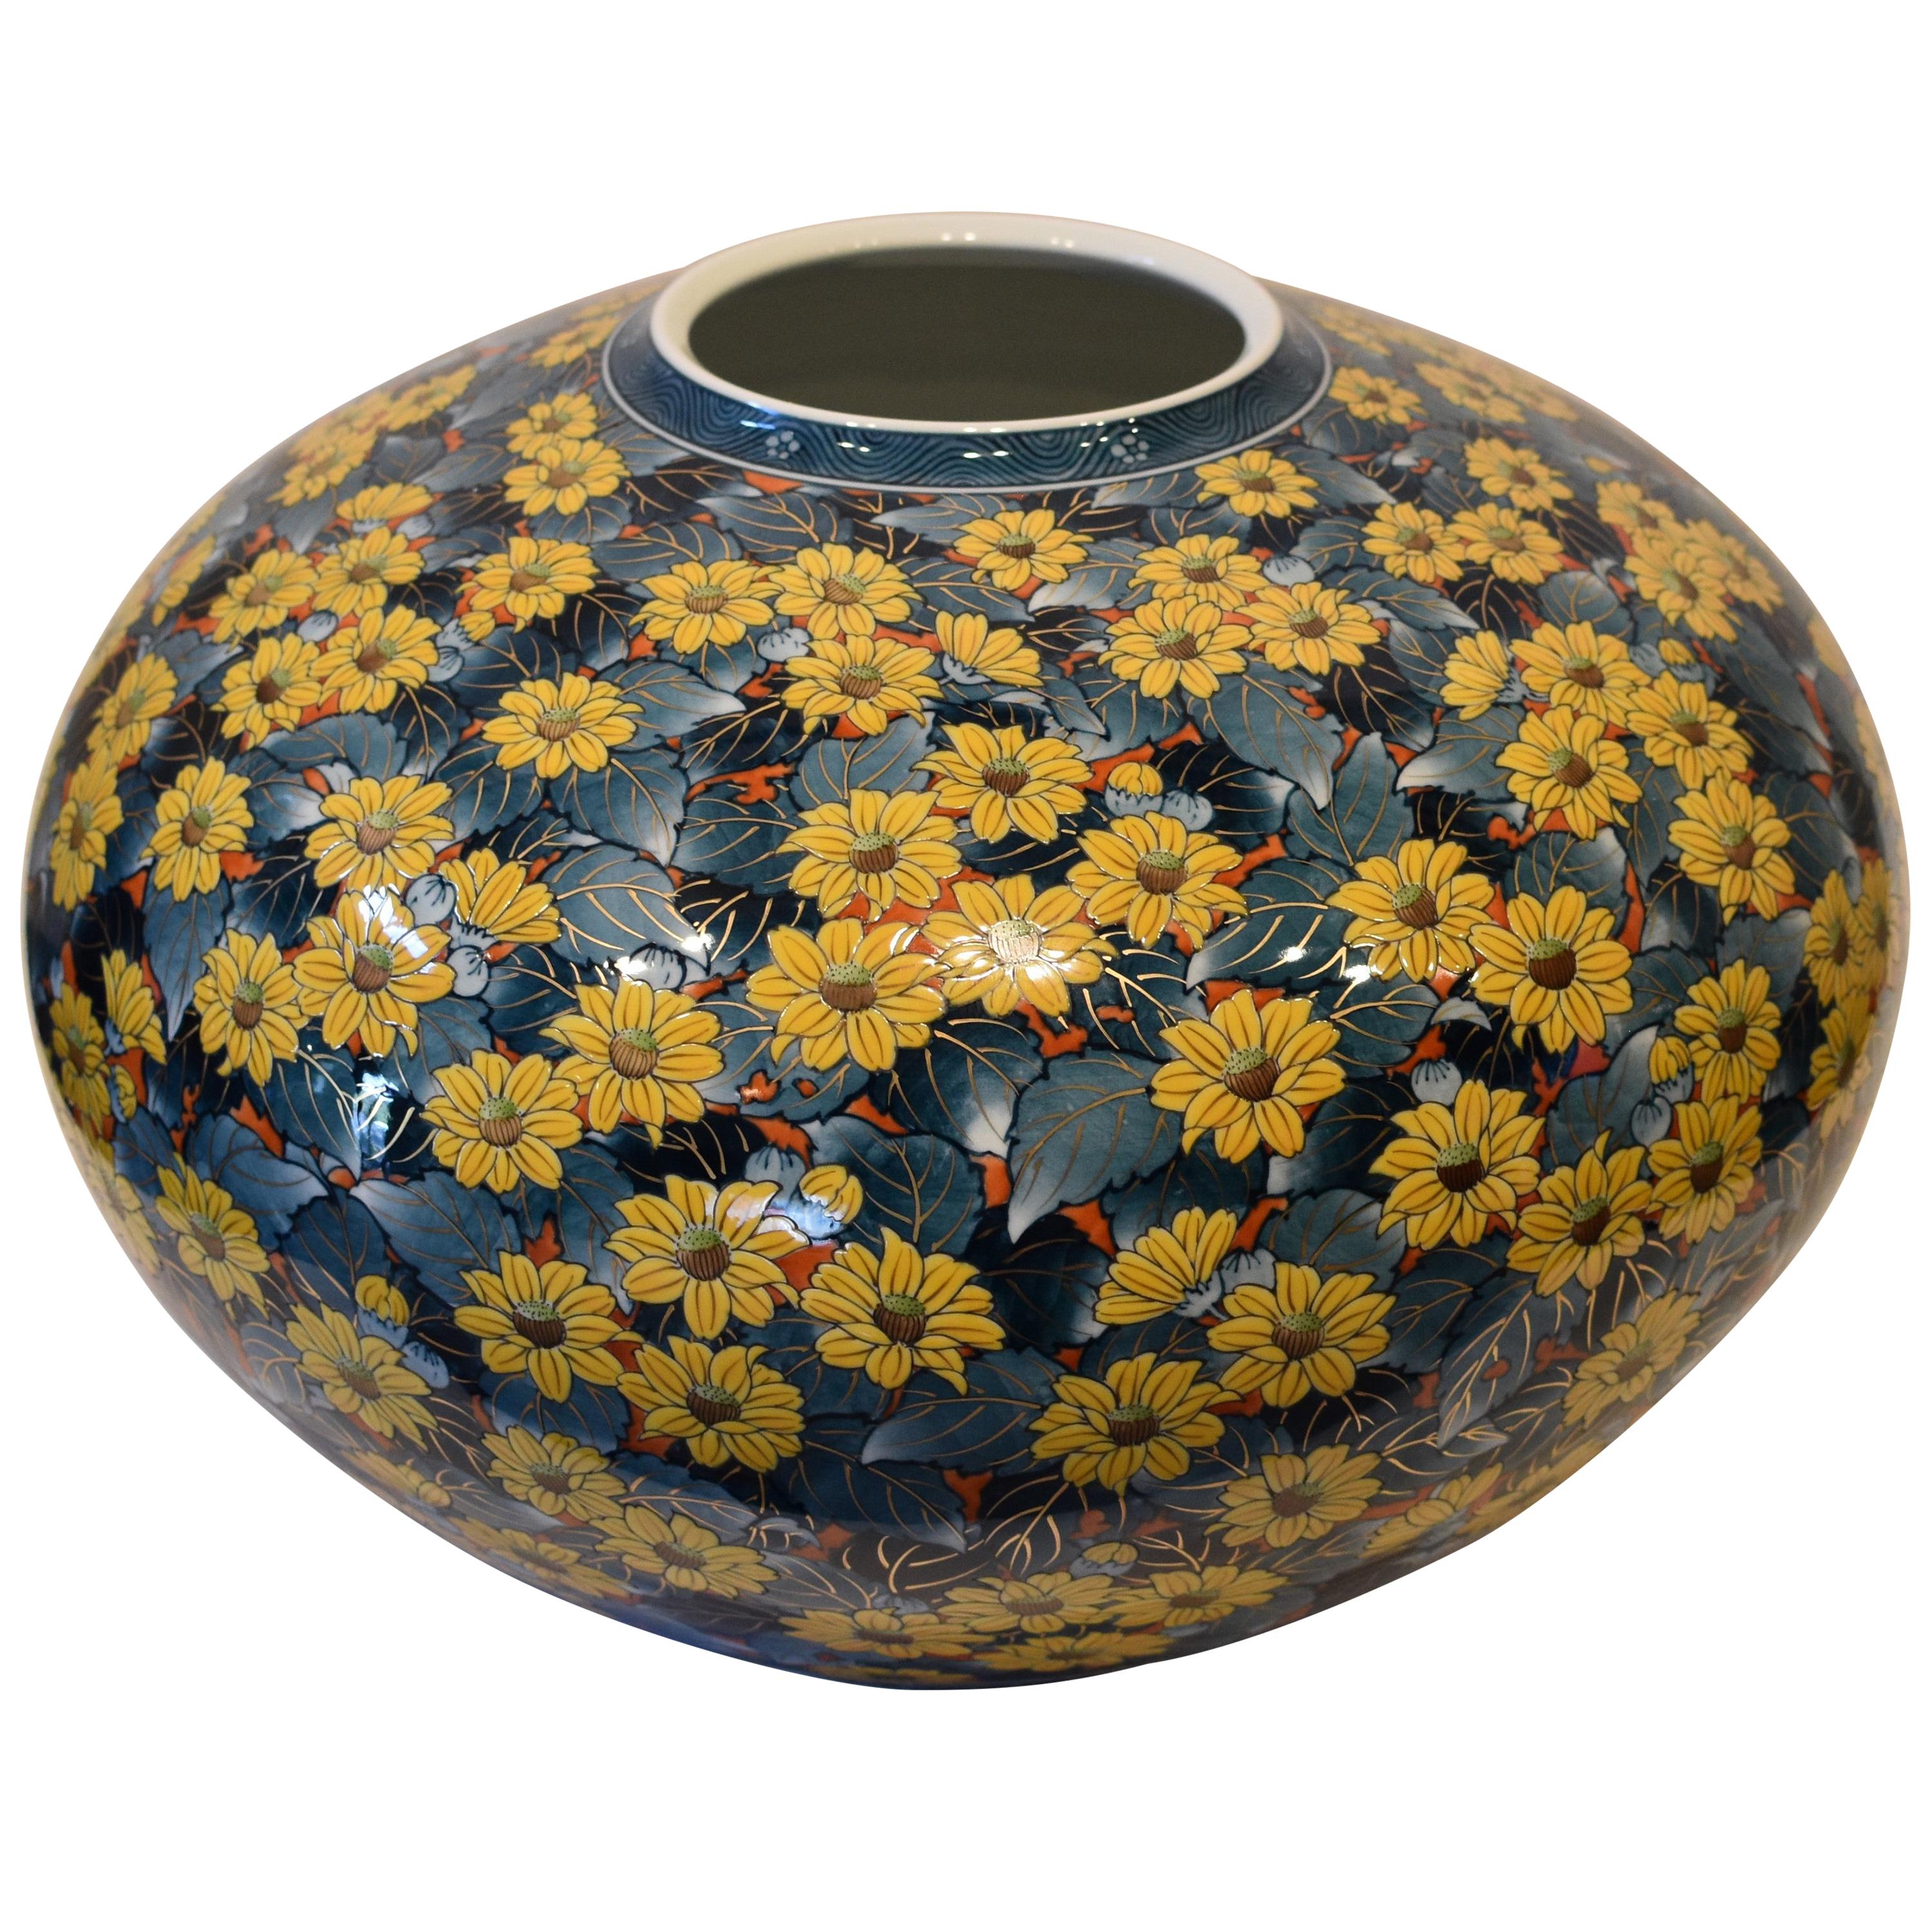 Yellow Blue Porcelain Vase by Japanese Contemporary Master Artist